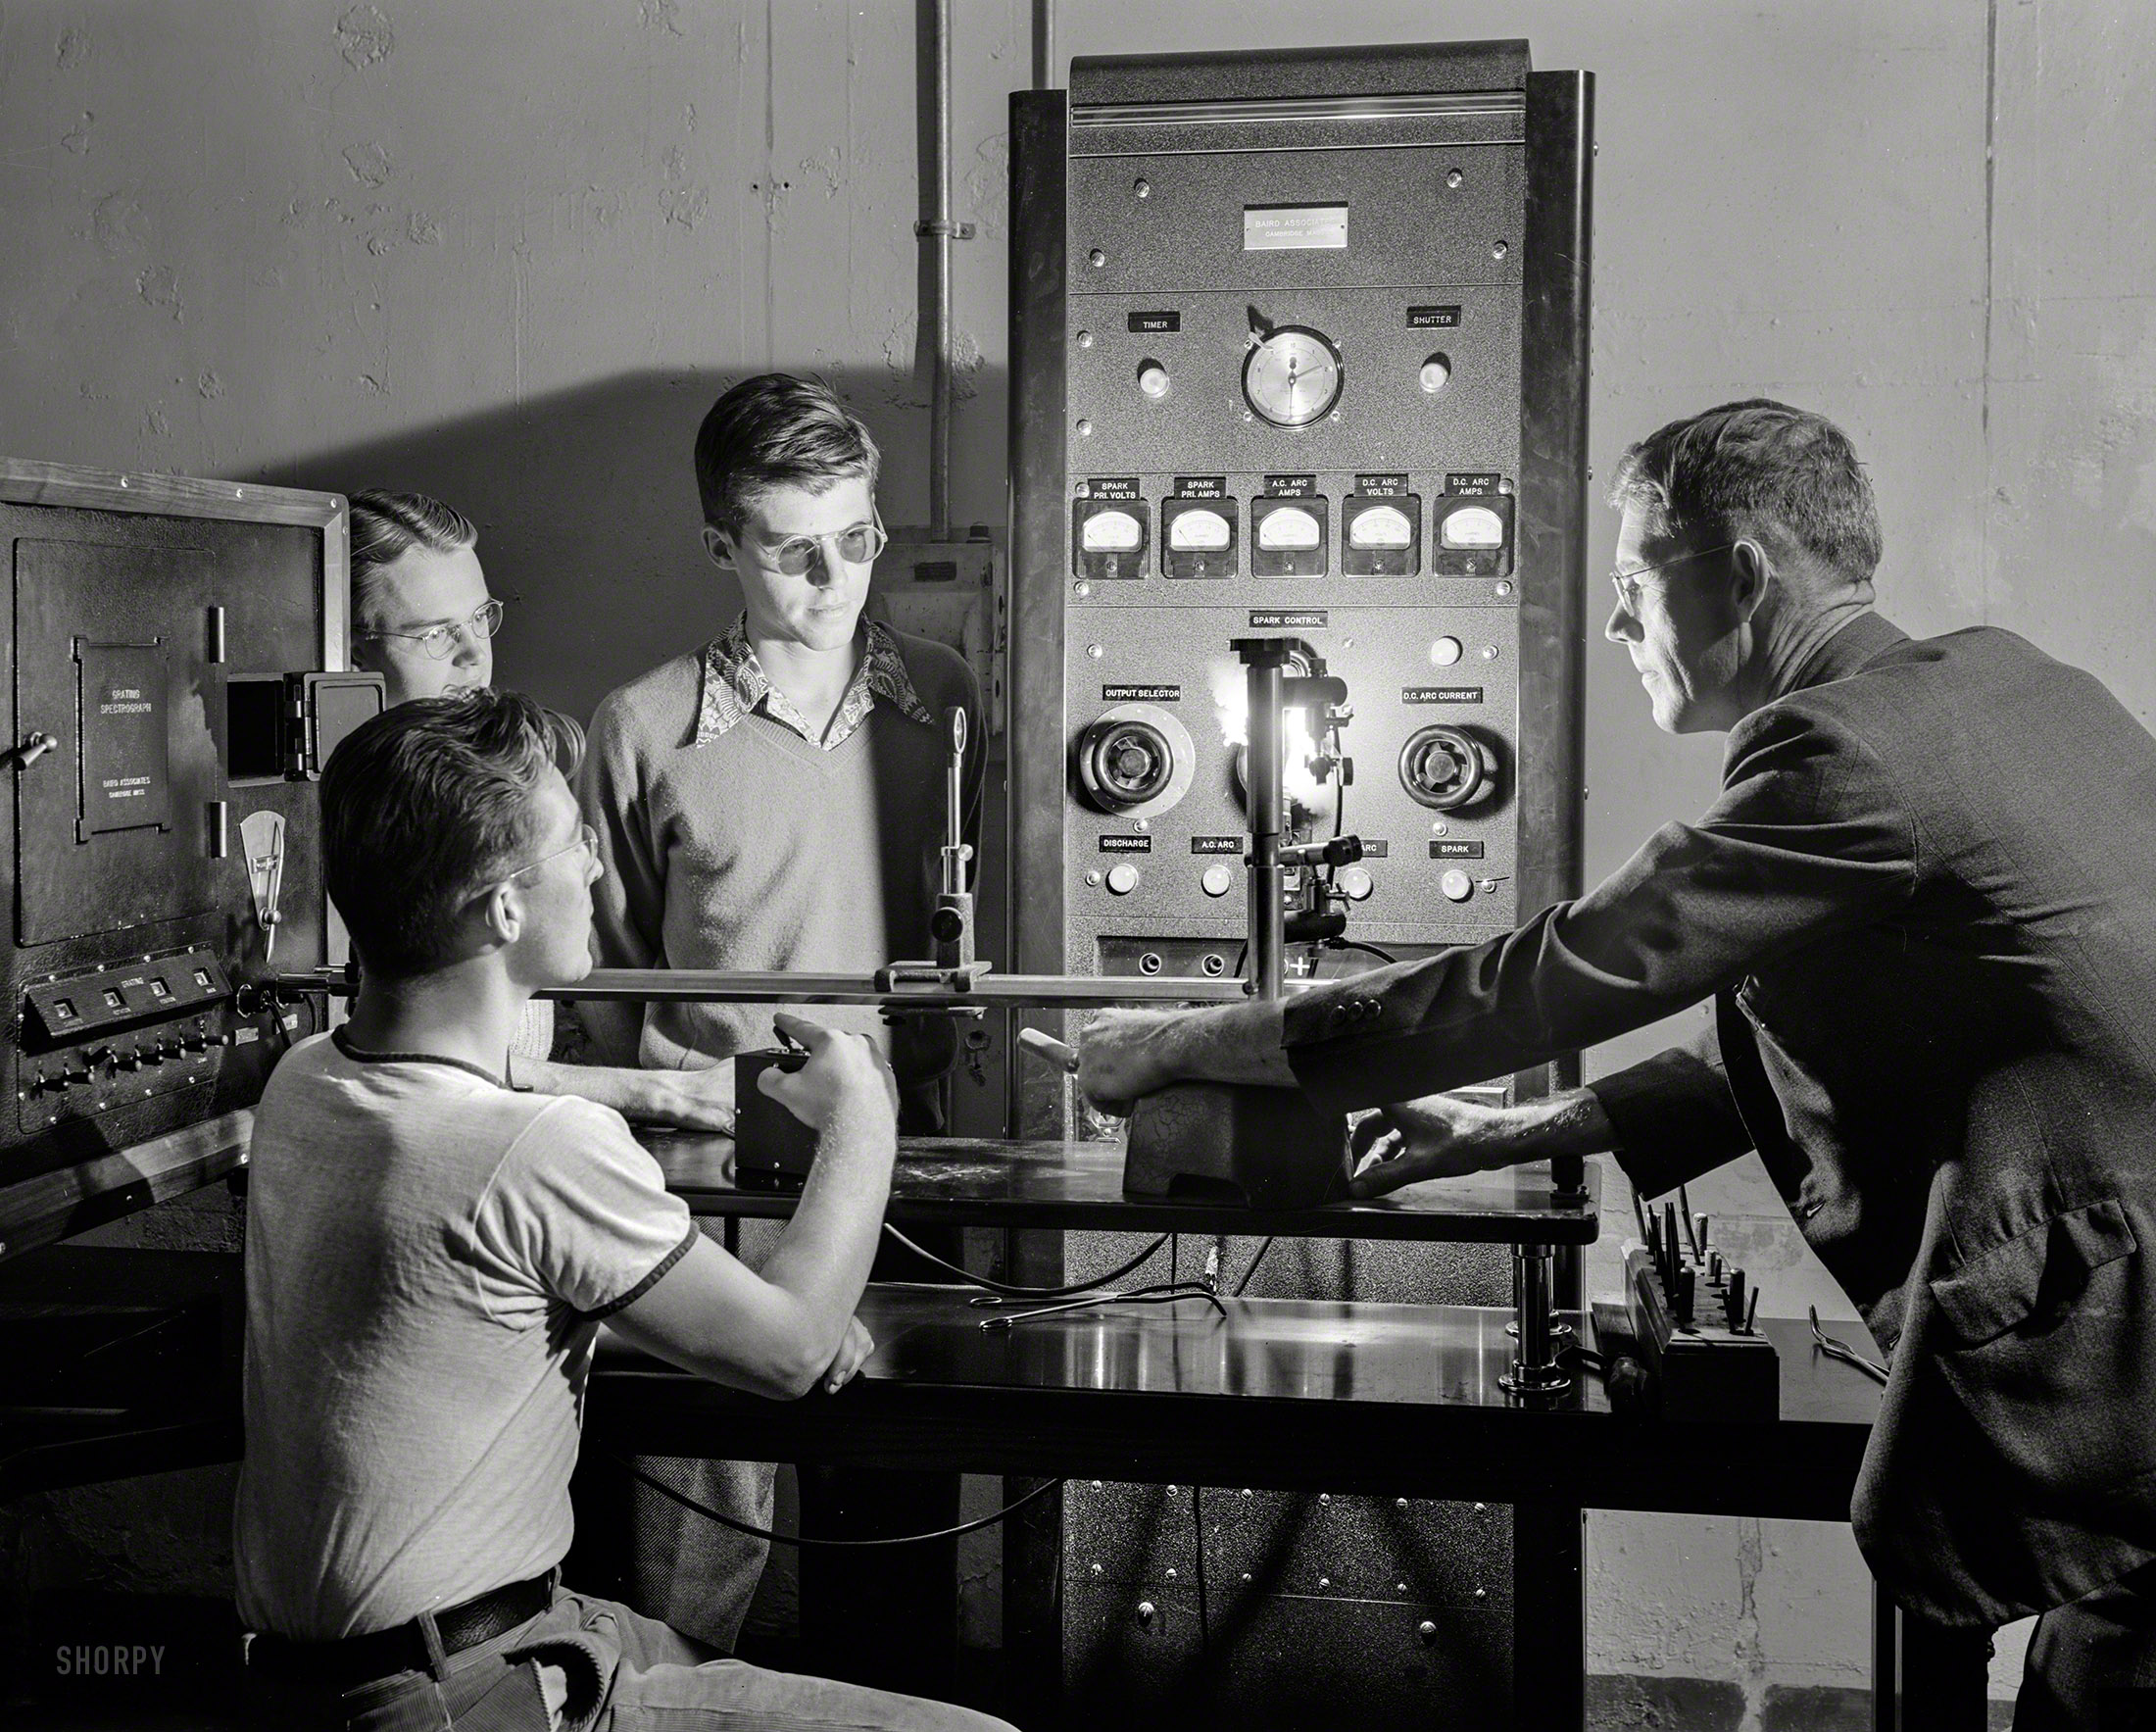 October 1942. State School of Mines in Golden, Colorado. "Speed in metallurgical anal&shy;ysis, to match the rapidity with which the nation arms itself, is possible through use of the spectrograph, a marvelous new machine used for study of materials through measurements of the arc of light they emit when heated. The aluminum and magnesium industries, steel companies and foundries use it for quick study of metals. Mines use it for exploration. The spectrograph will yield an analysis of seven elements in 15 minutes, which would require up to four hours by old chemical methods. Students in defense training courses at a famous mining-engineering school listen as an instructor shows them how the machine operates." Photo by Andreas Feininger, Office of War Information. View full size.